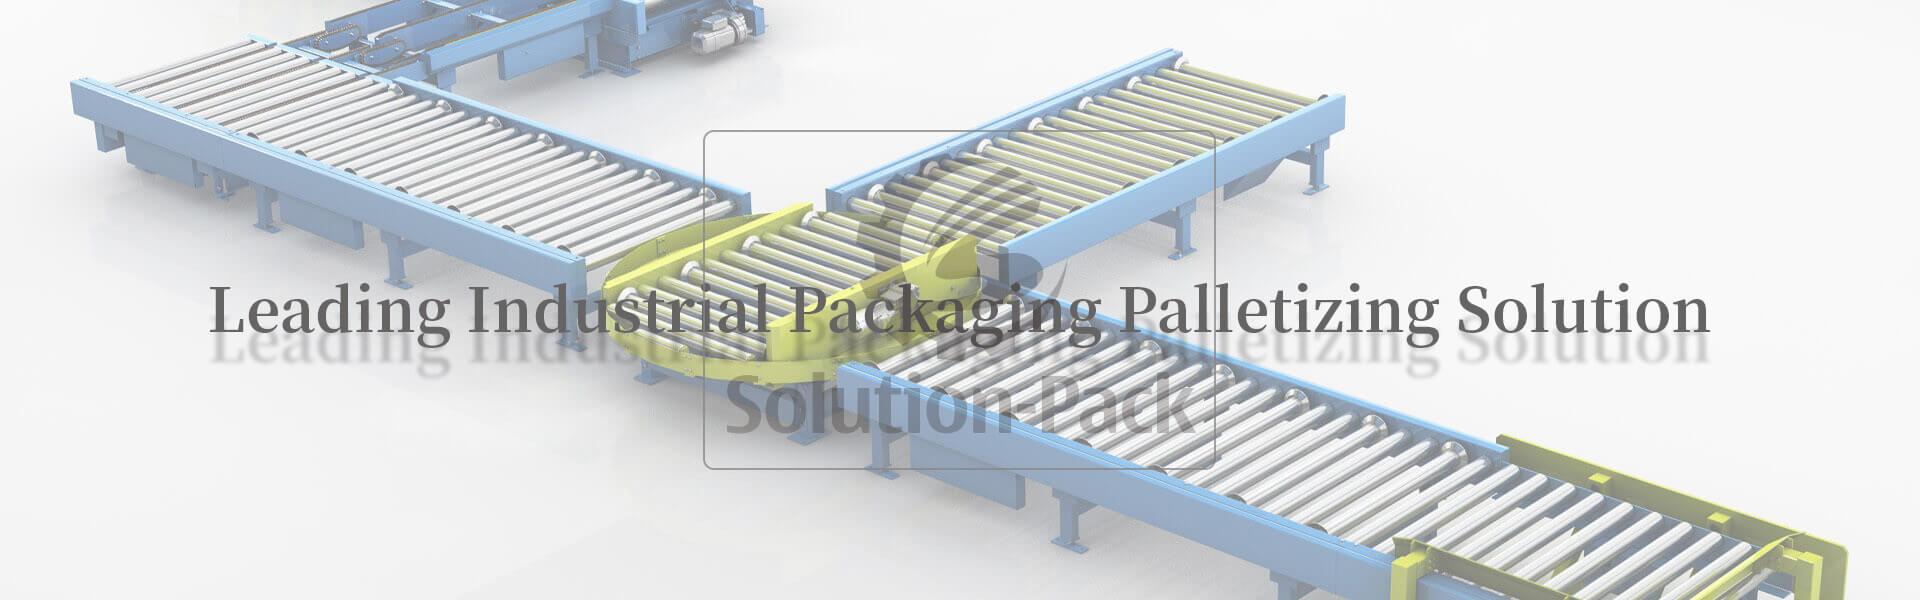 Solution-Pack | Intelligent Industrial Packaging Palletizing Solution middle banner picture| Automatic Bagging Palletizing Machine | Manual Bagging Palletizing Machine | Bagging Machine